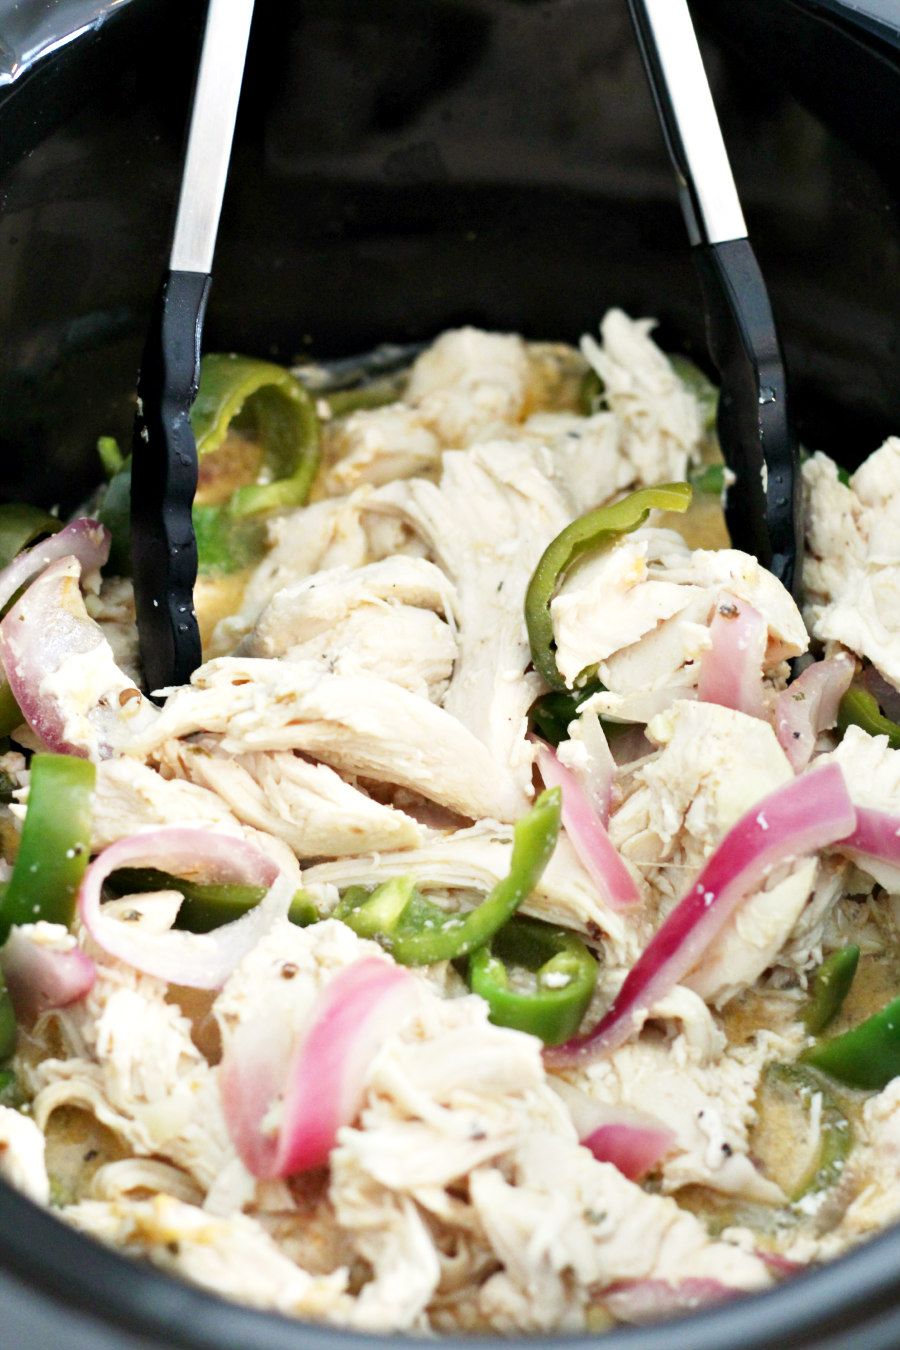 Chicken shredded in slow cooker with peppers and onions. Tongs sit inside slow cooker.